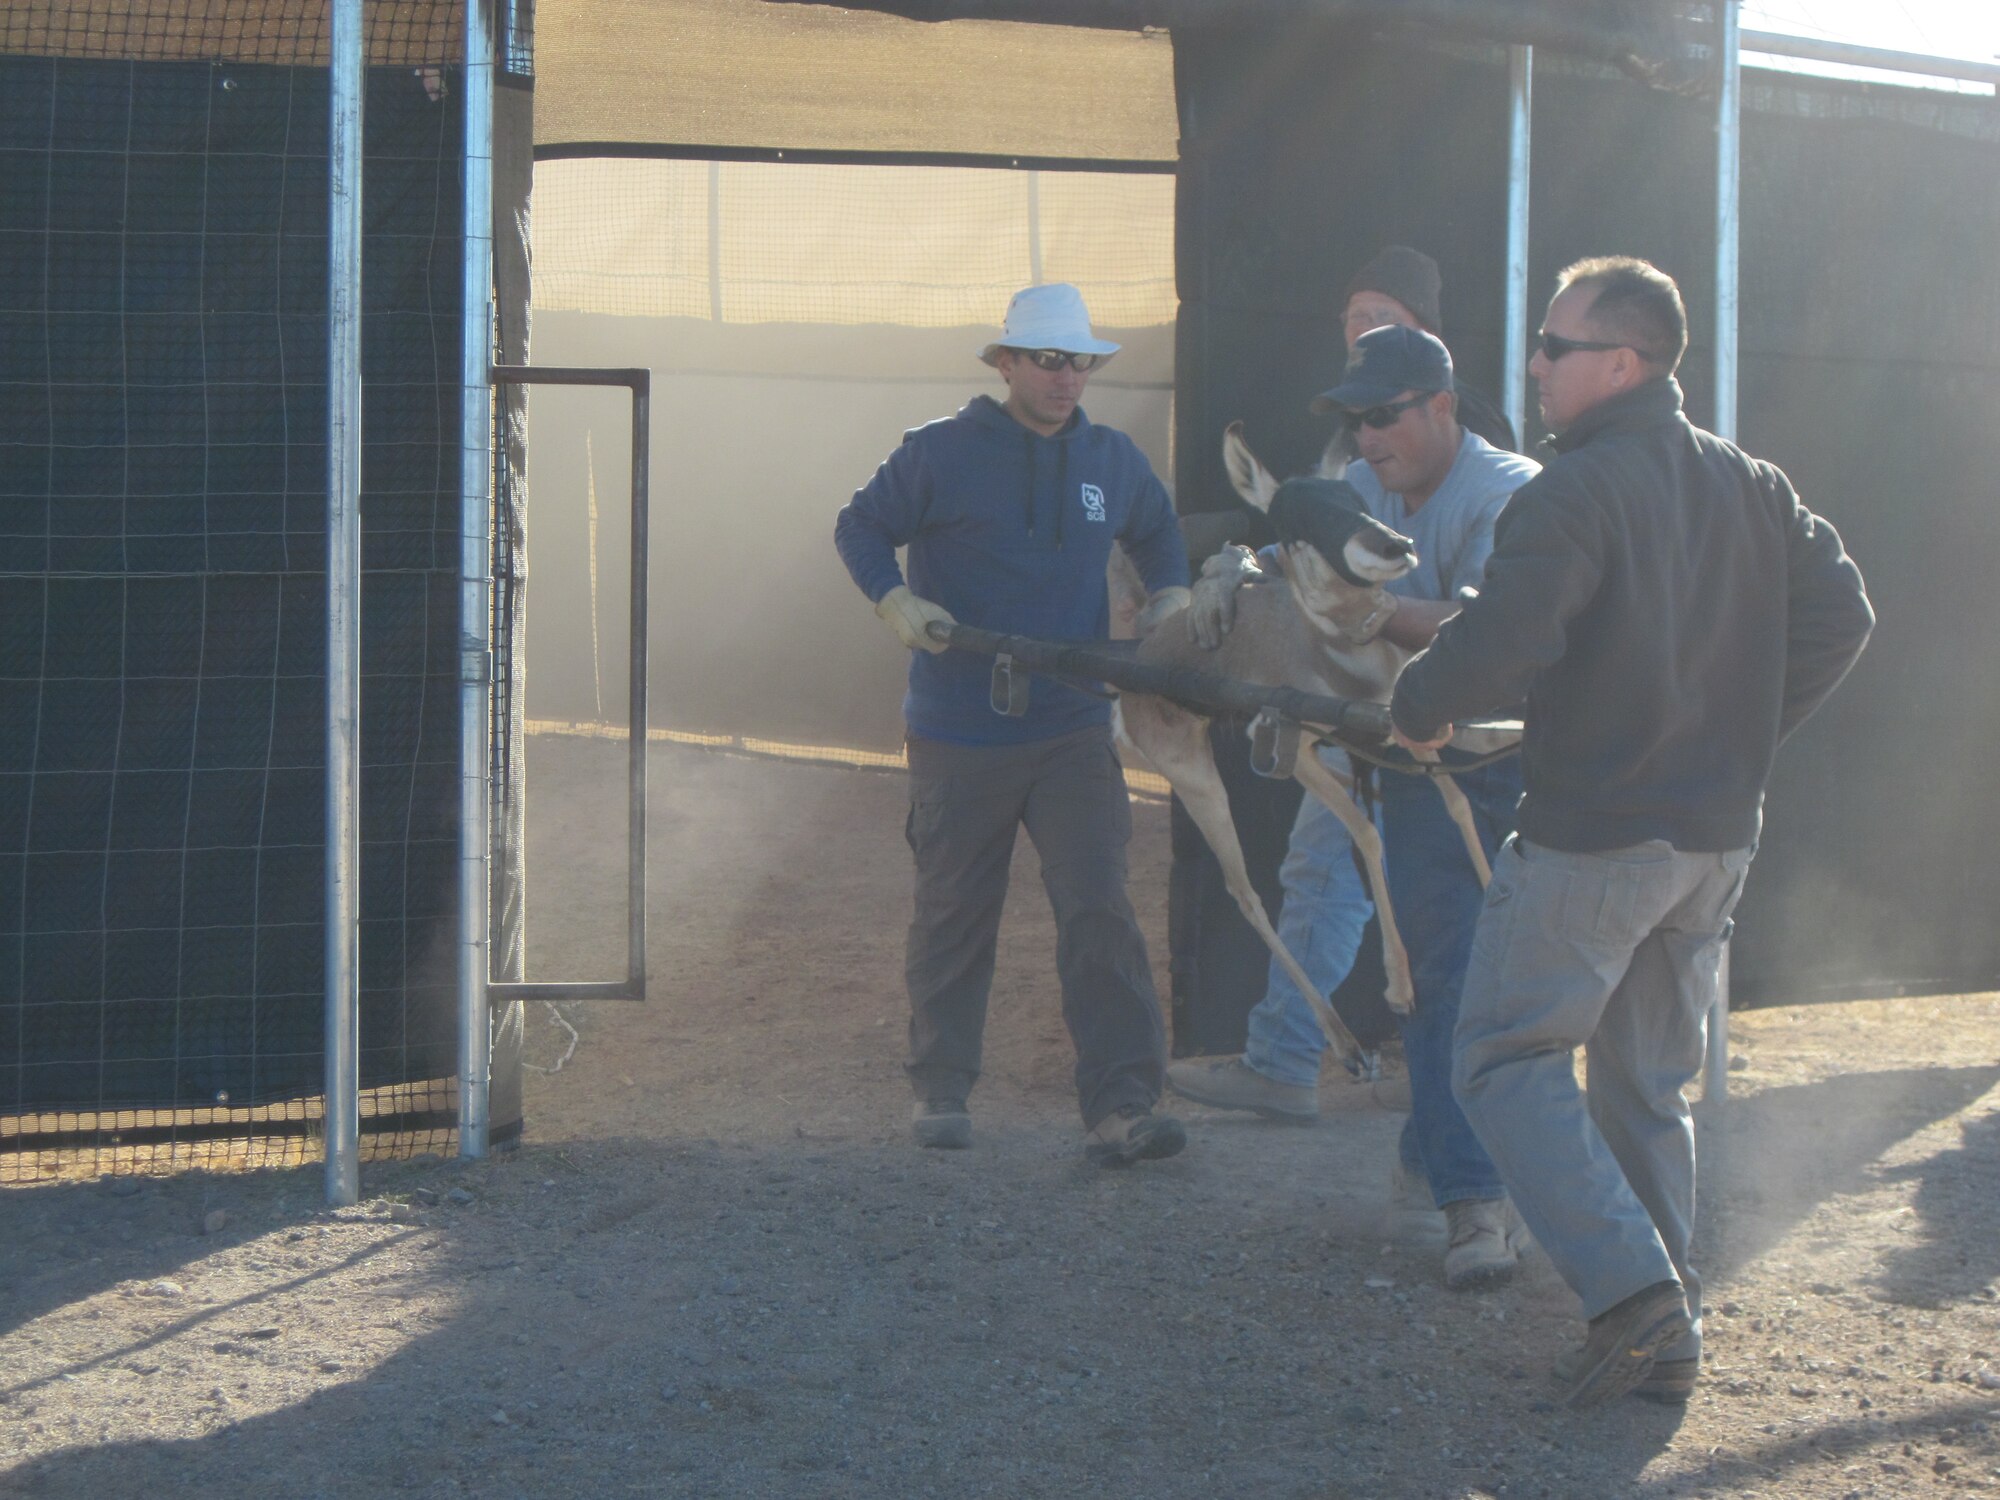 Team members carry a pronghorn from the enclosure to the waiting veterinary and marking teams. Once complete, individual instructions will be provided as to where the pronghorn will go from there. A veterinarian and technician accompany each helicopter transfer of the animals. (Courtesy photo/Dan Garcia)